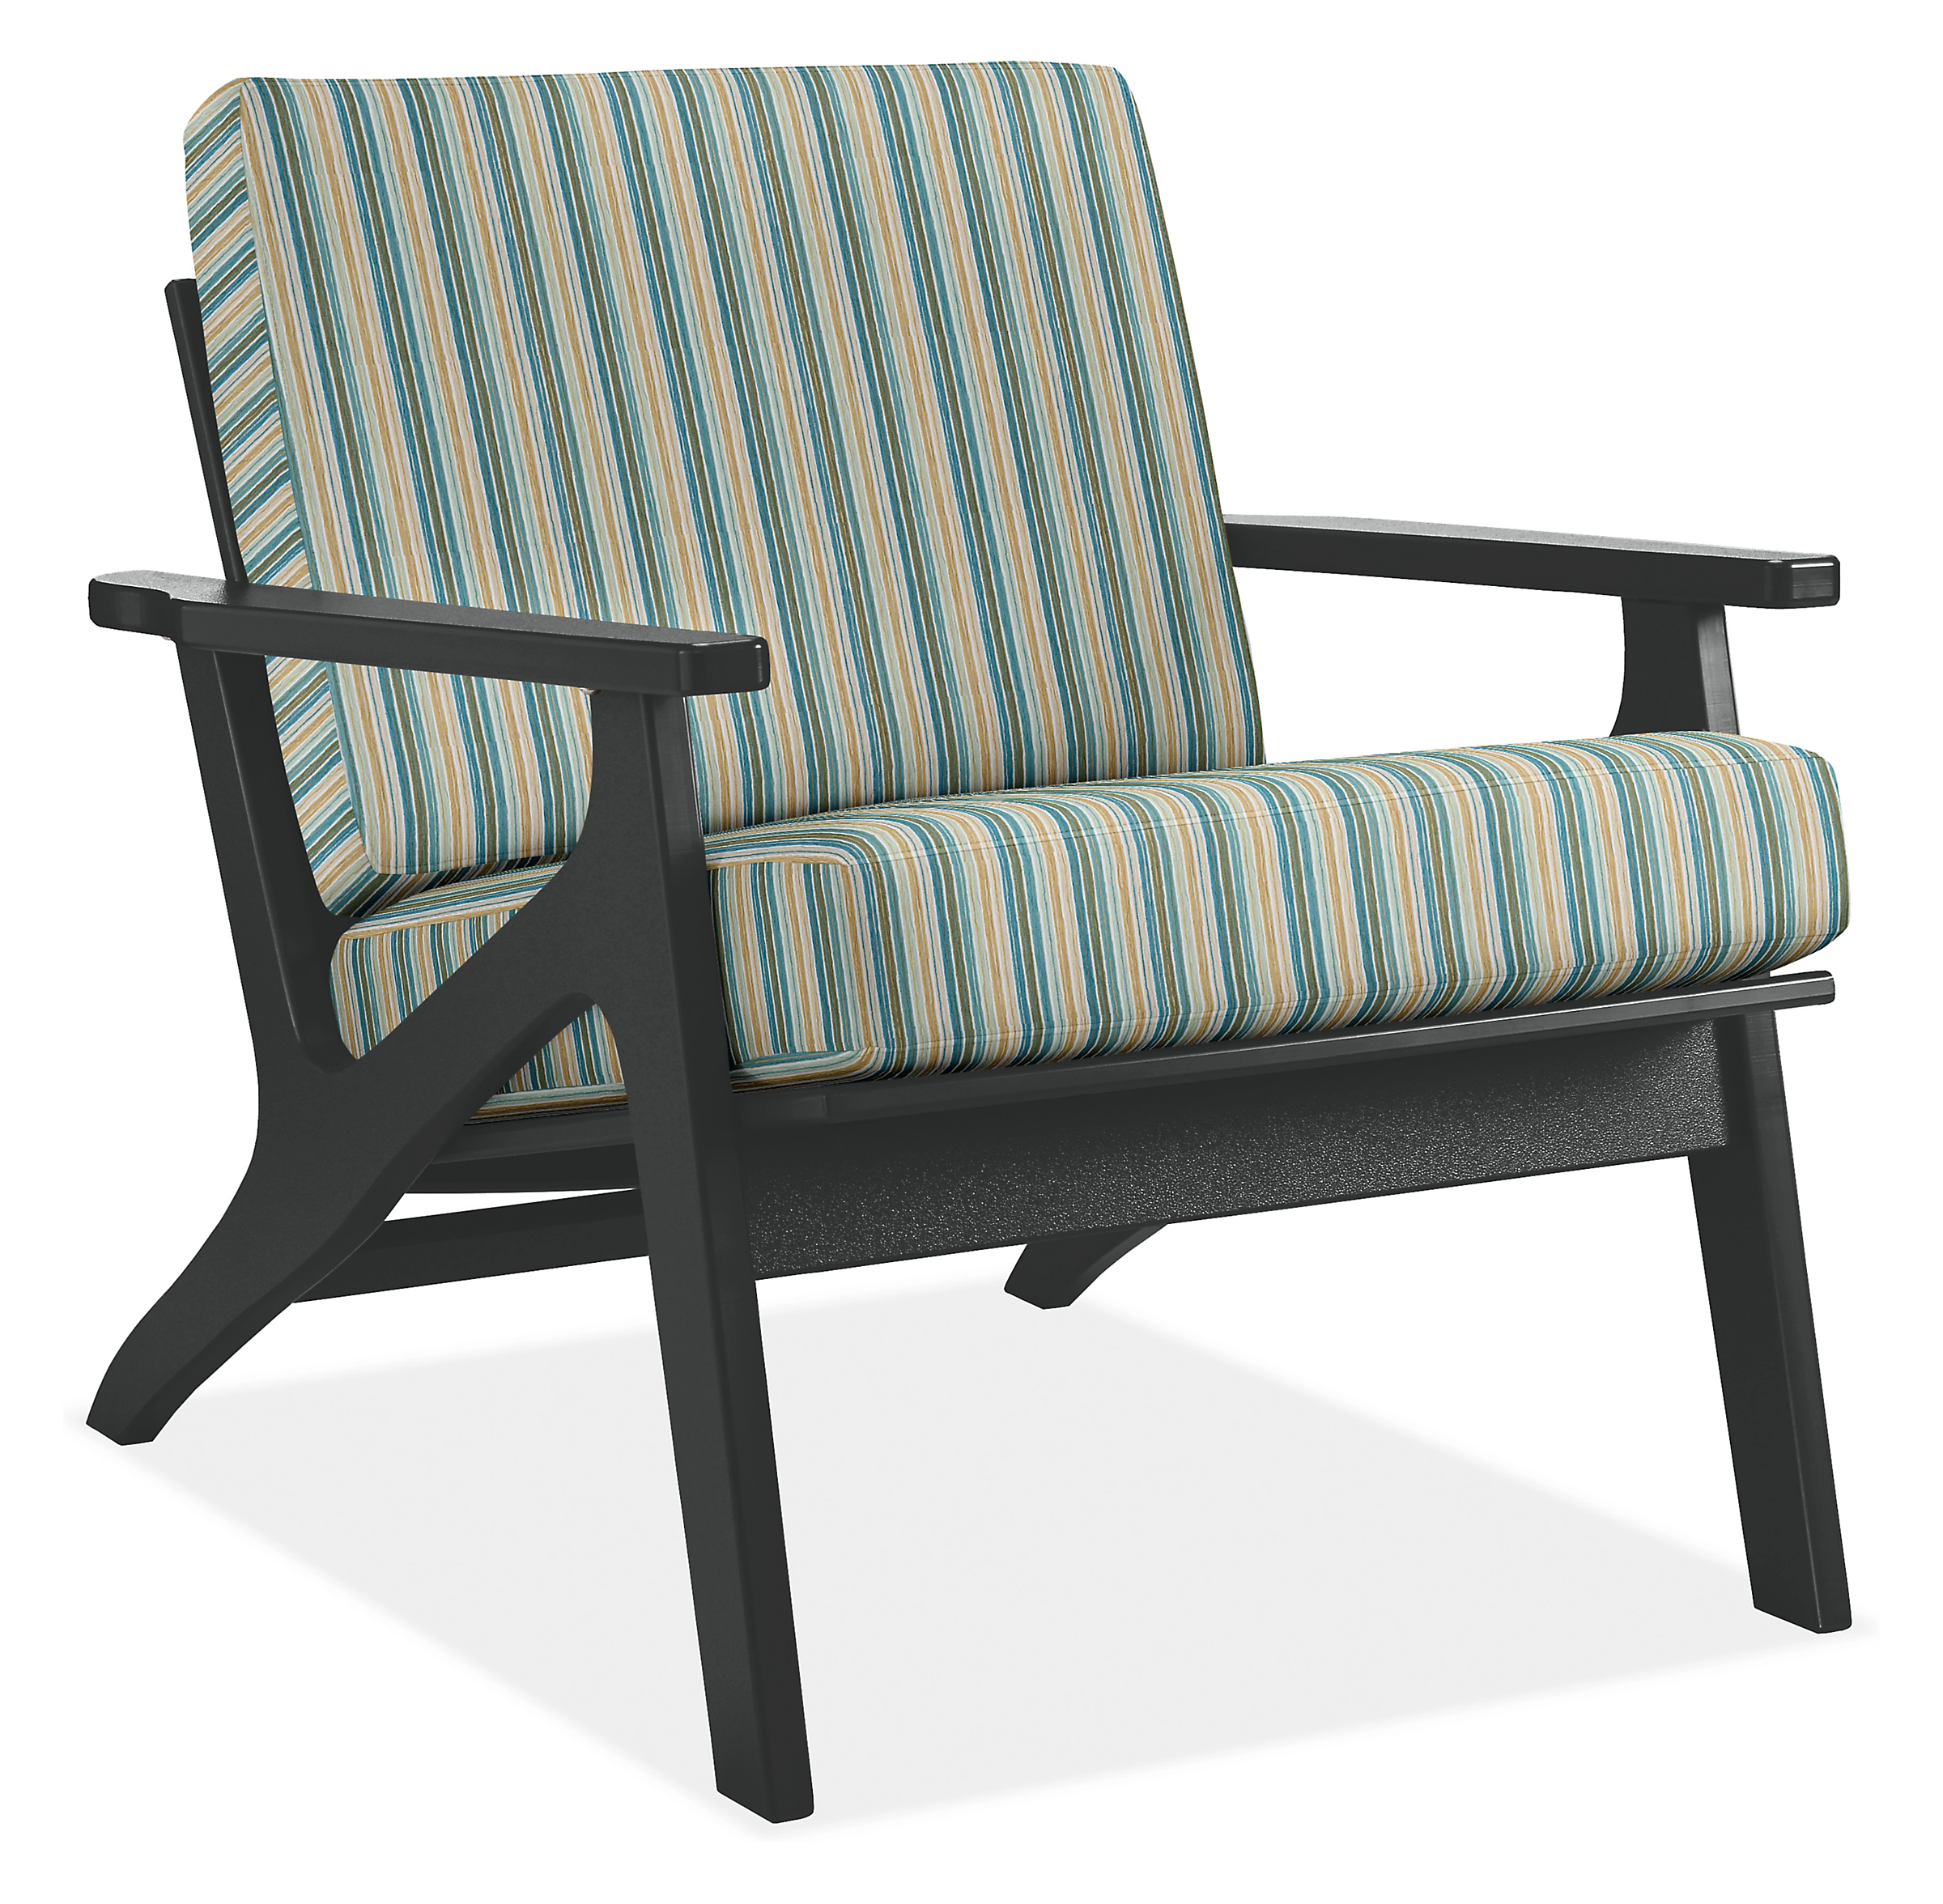 Breeze Chair in Vinna Teal with Black HDPE Frame